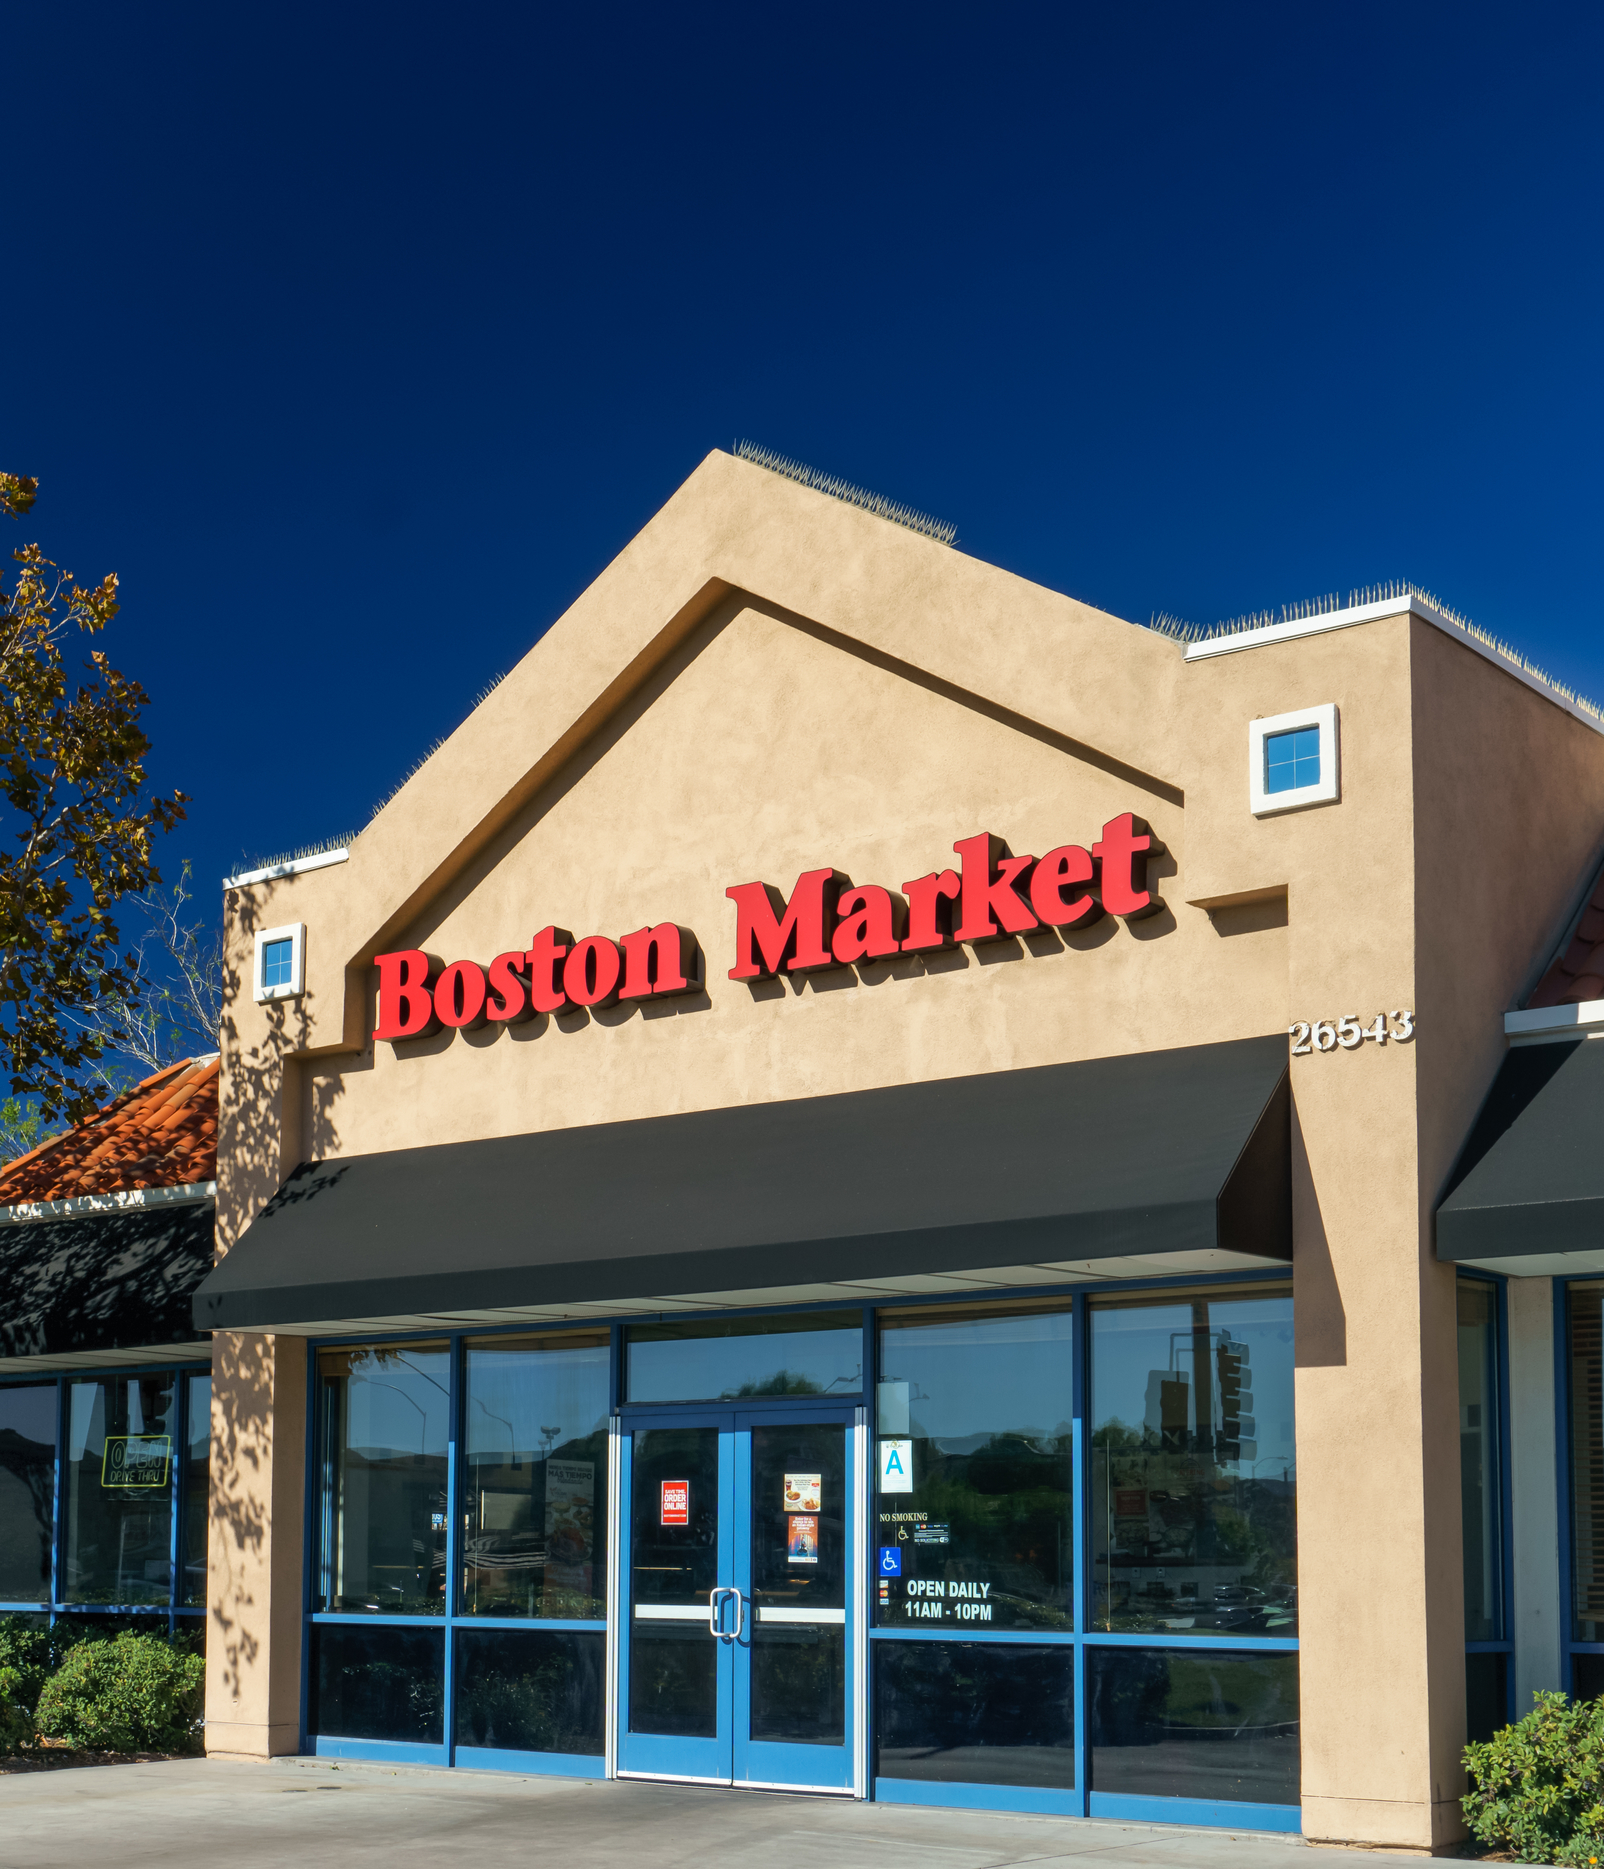 Boston Market: Buy one meal & drink, get one meal free